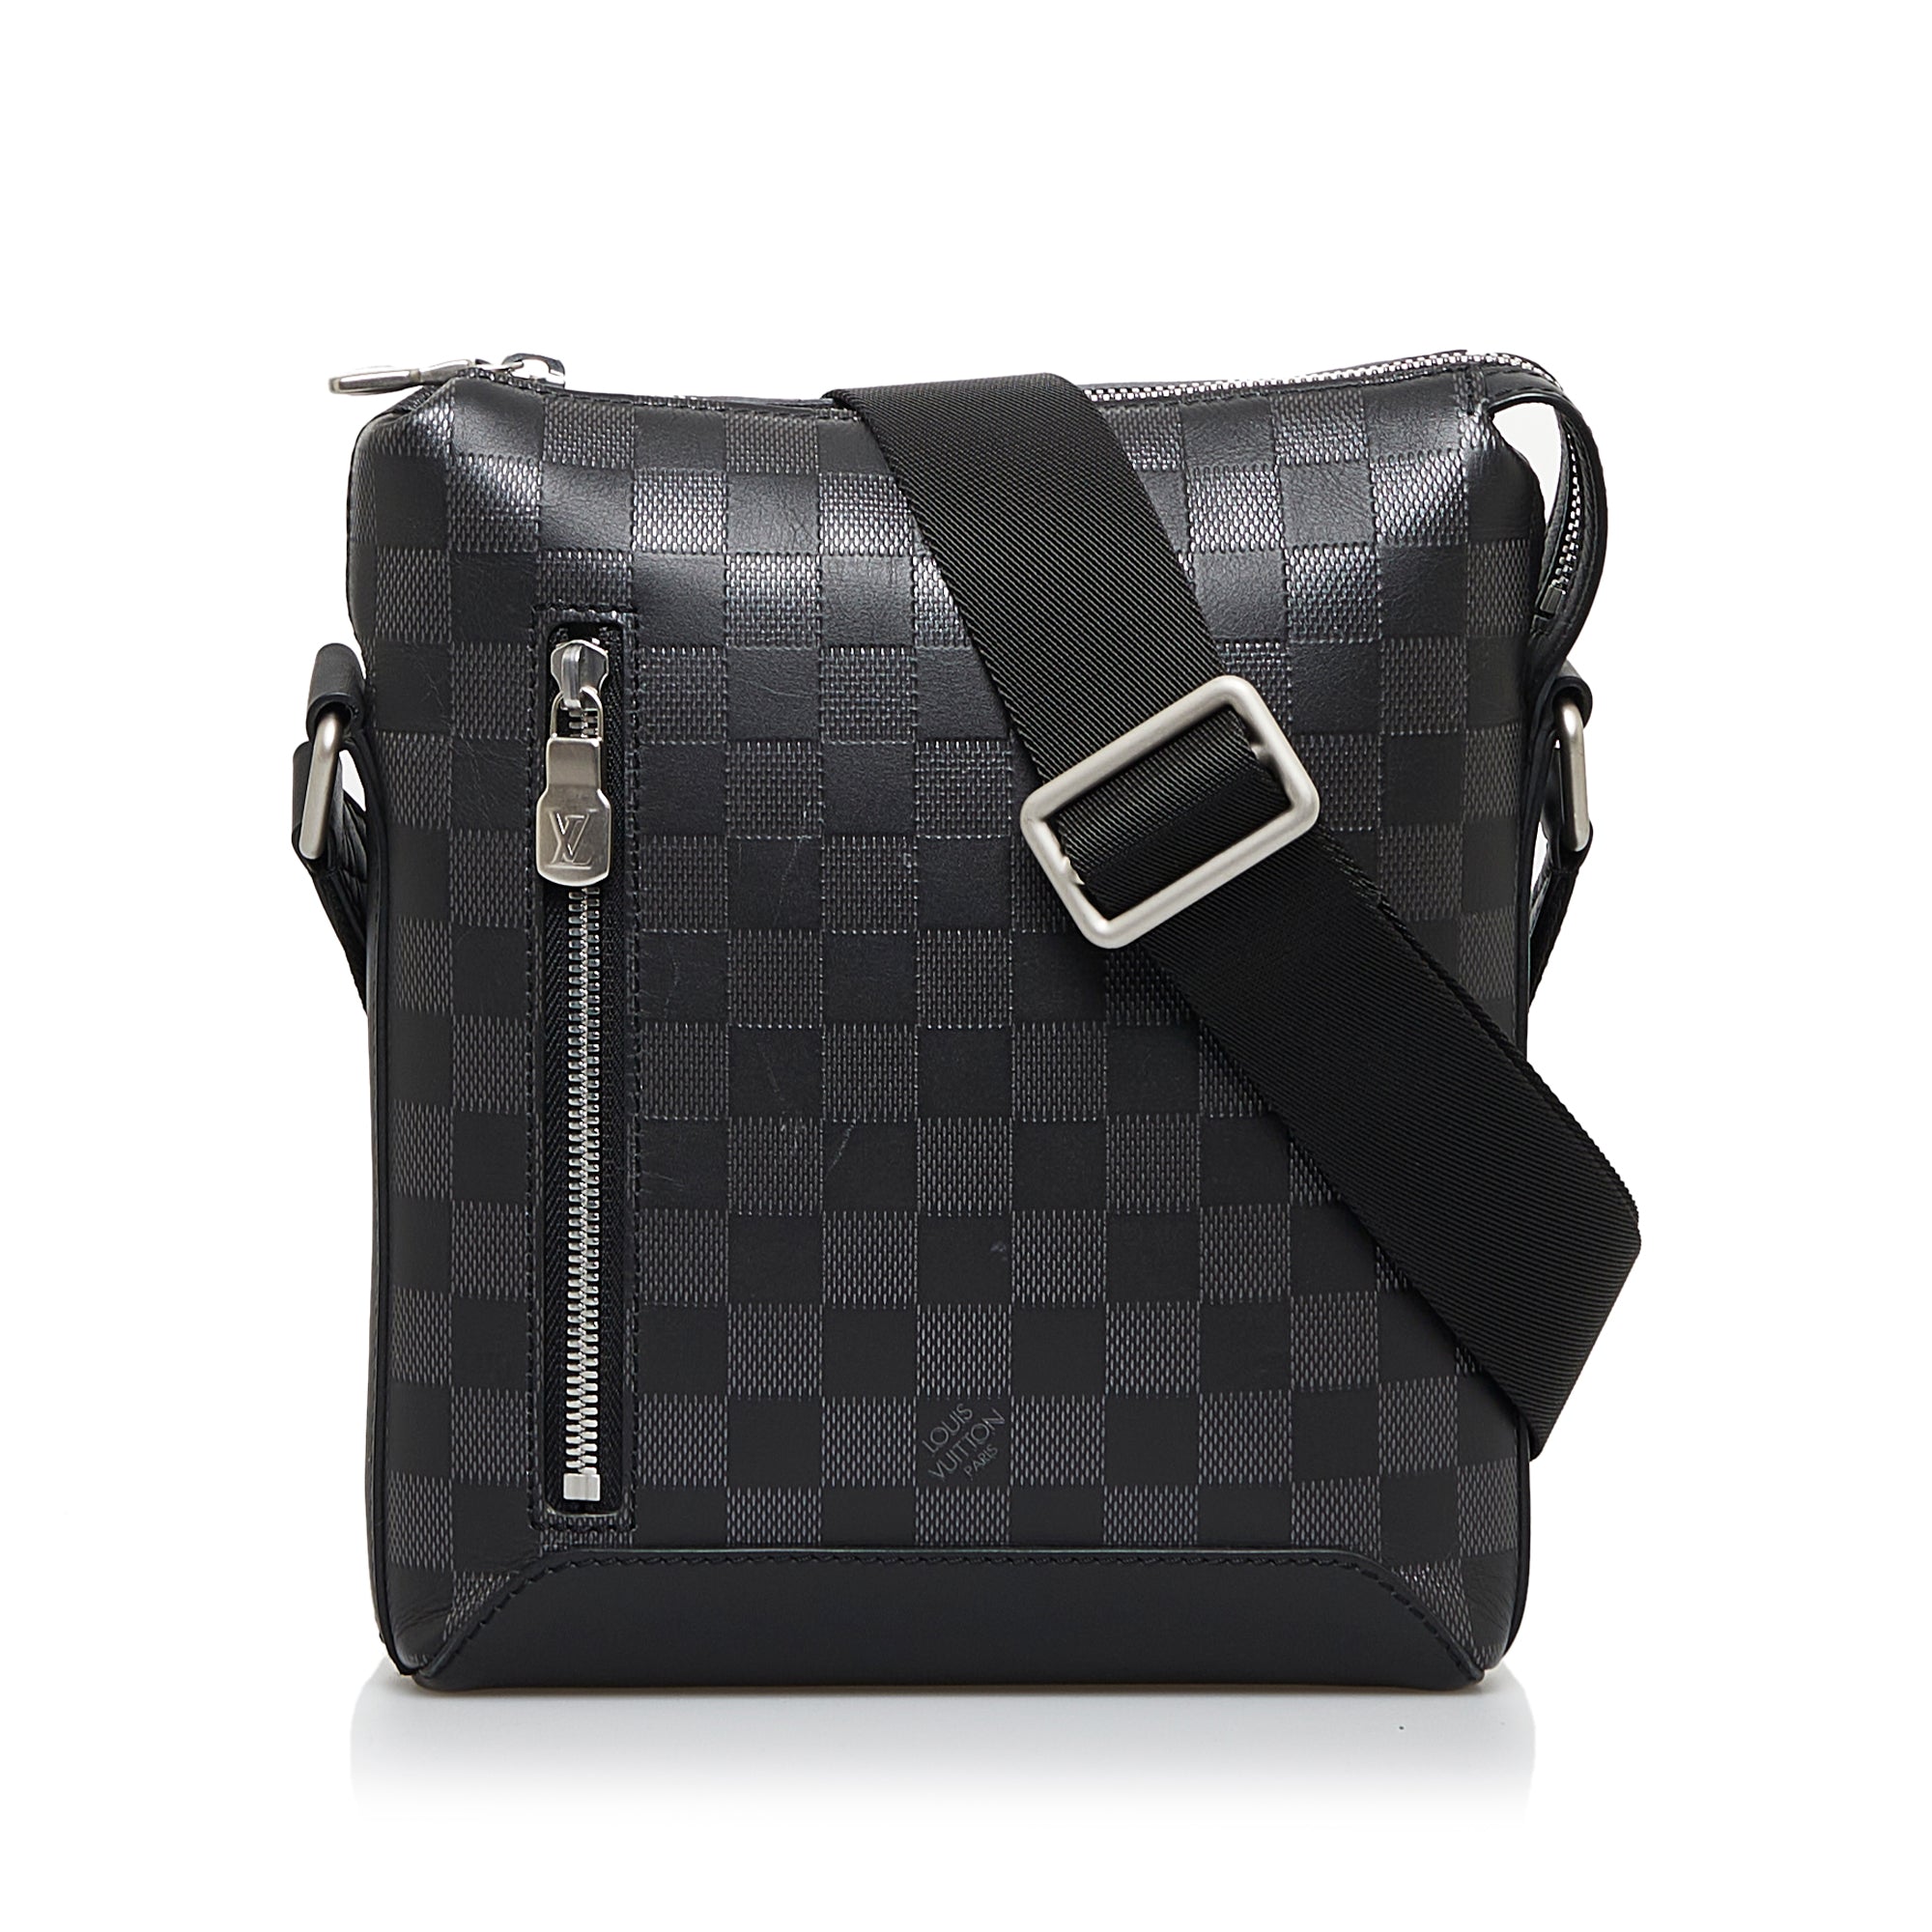 Louis Vuitton Discovery Messenger Bag Damier Infini Leather BB